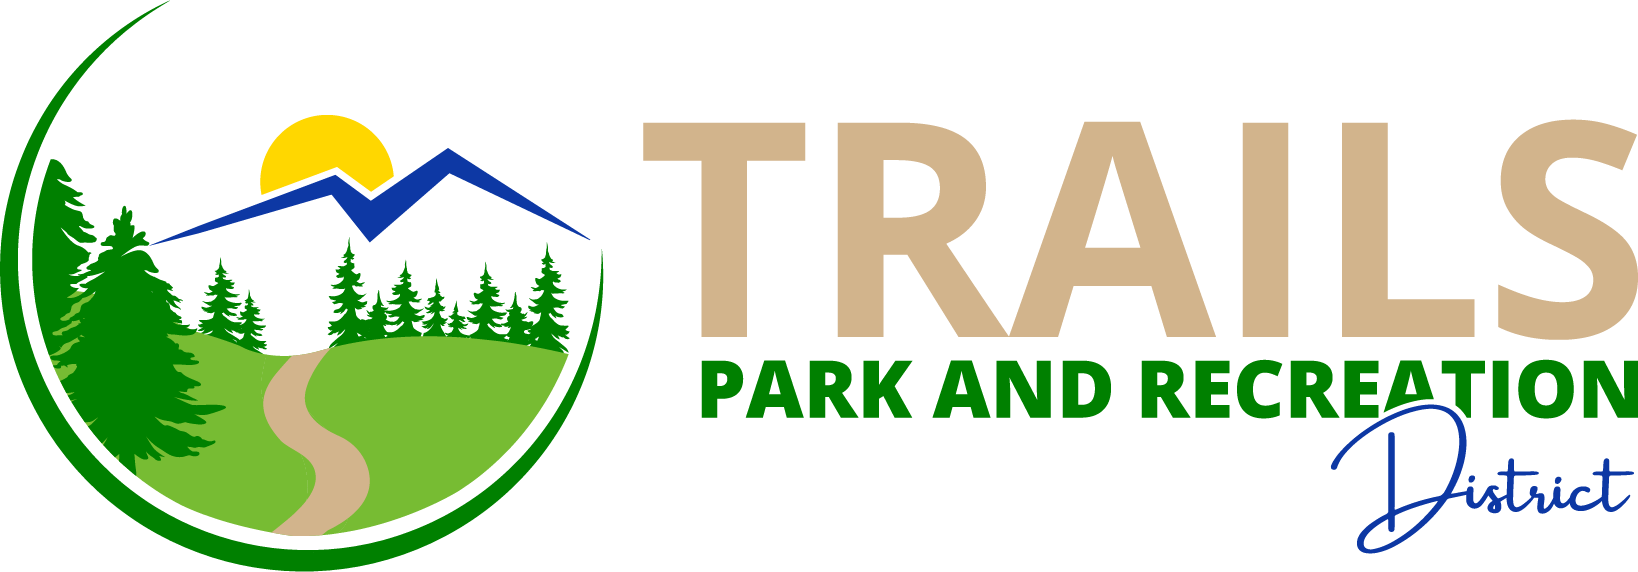 Organization logo of Trails Park and Recreation District